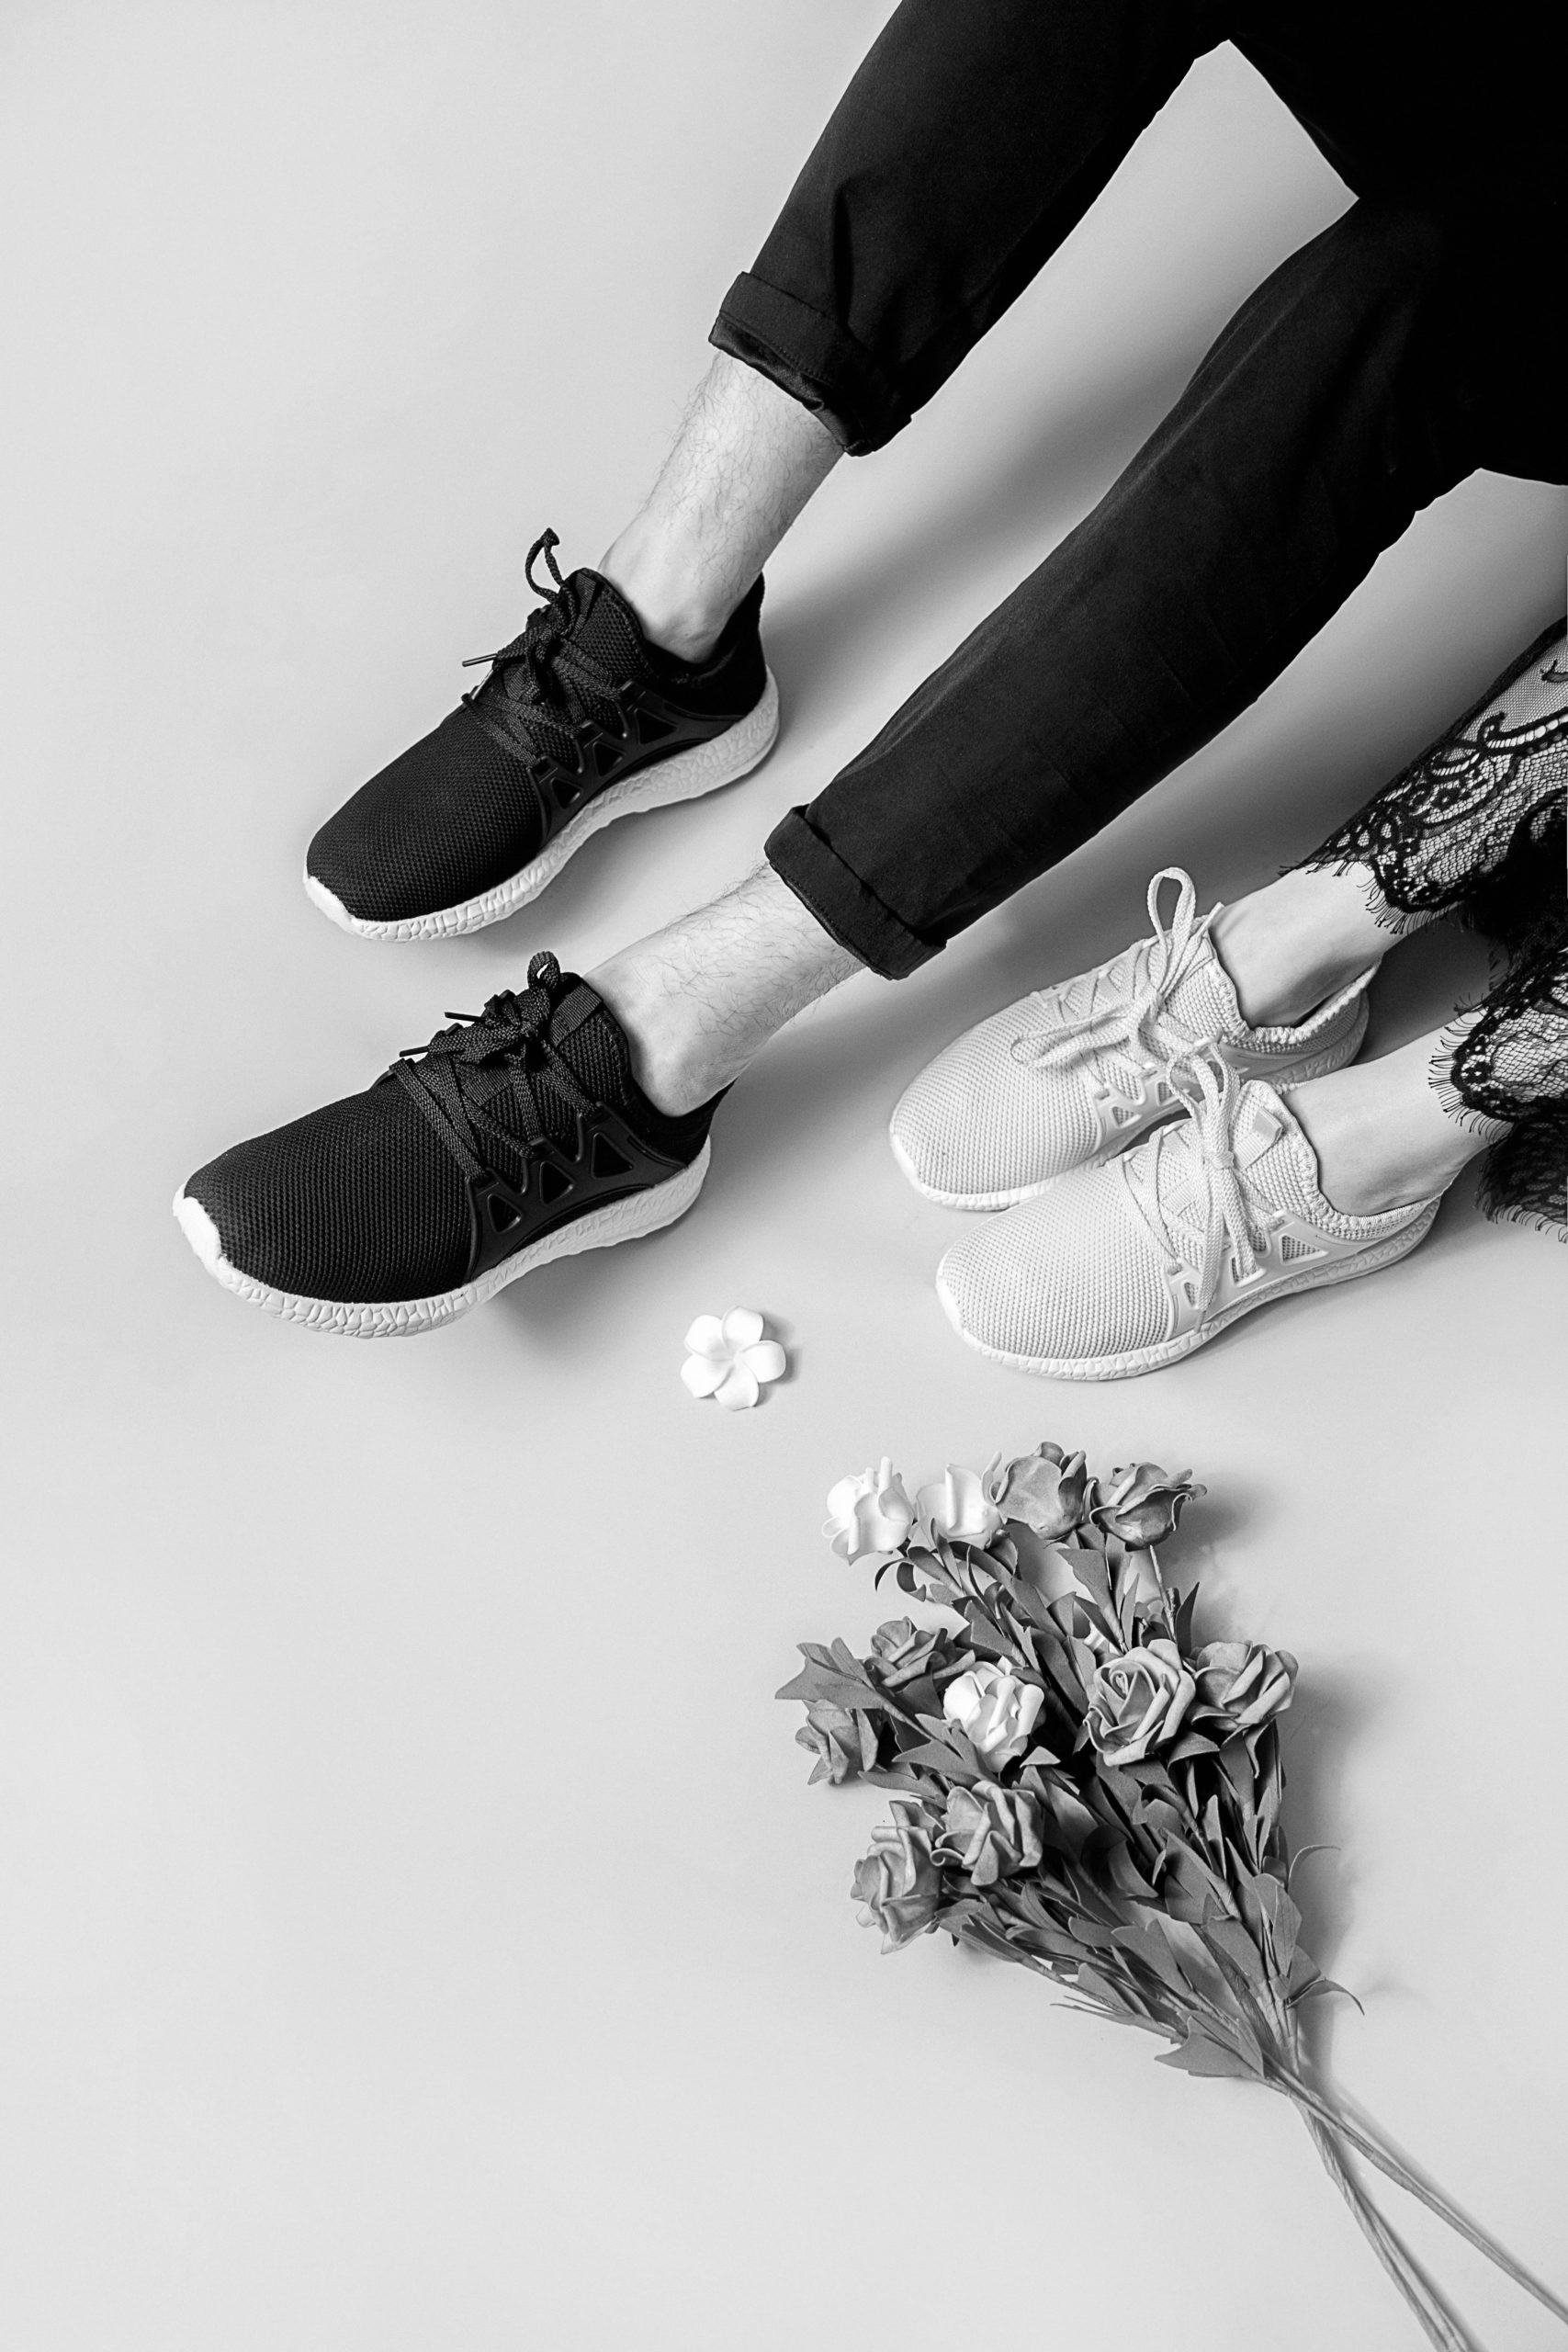 two people wearing shoes for crossfit and tights sitting next to a bouquet of flowers on a blank background